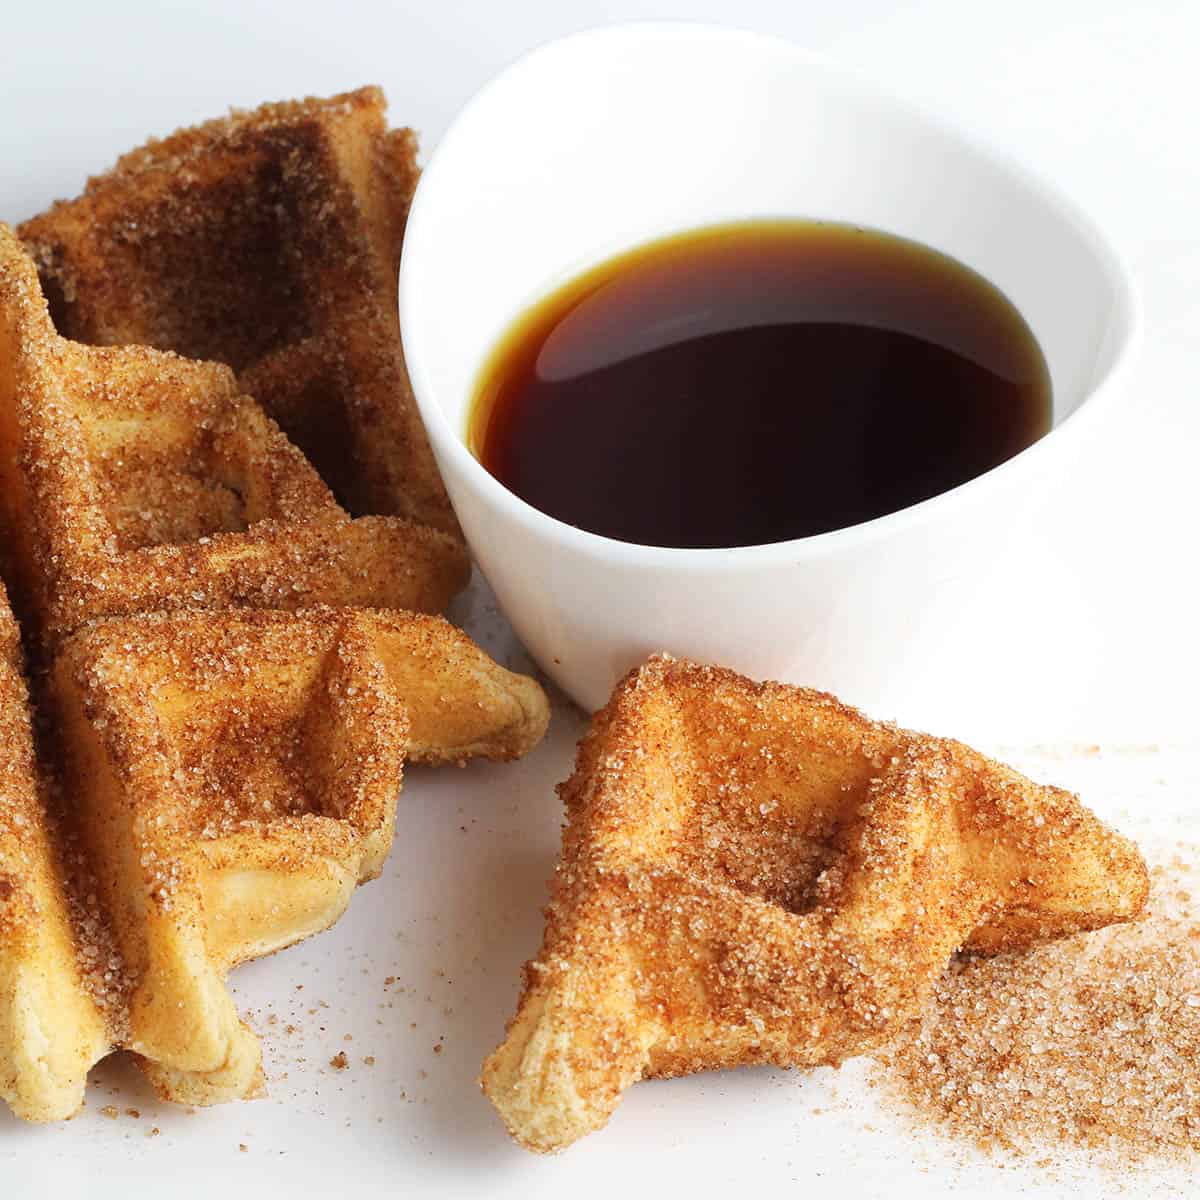 on the left a small waffle covered in cinnamon "sugar" (erythritol) with a couple smaller pieces around it, a small pile of cinnamon erythritol, and a small dipping bowl of maple syrup